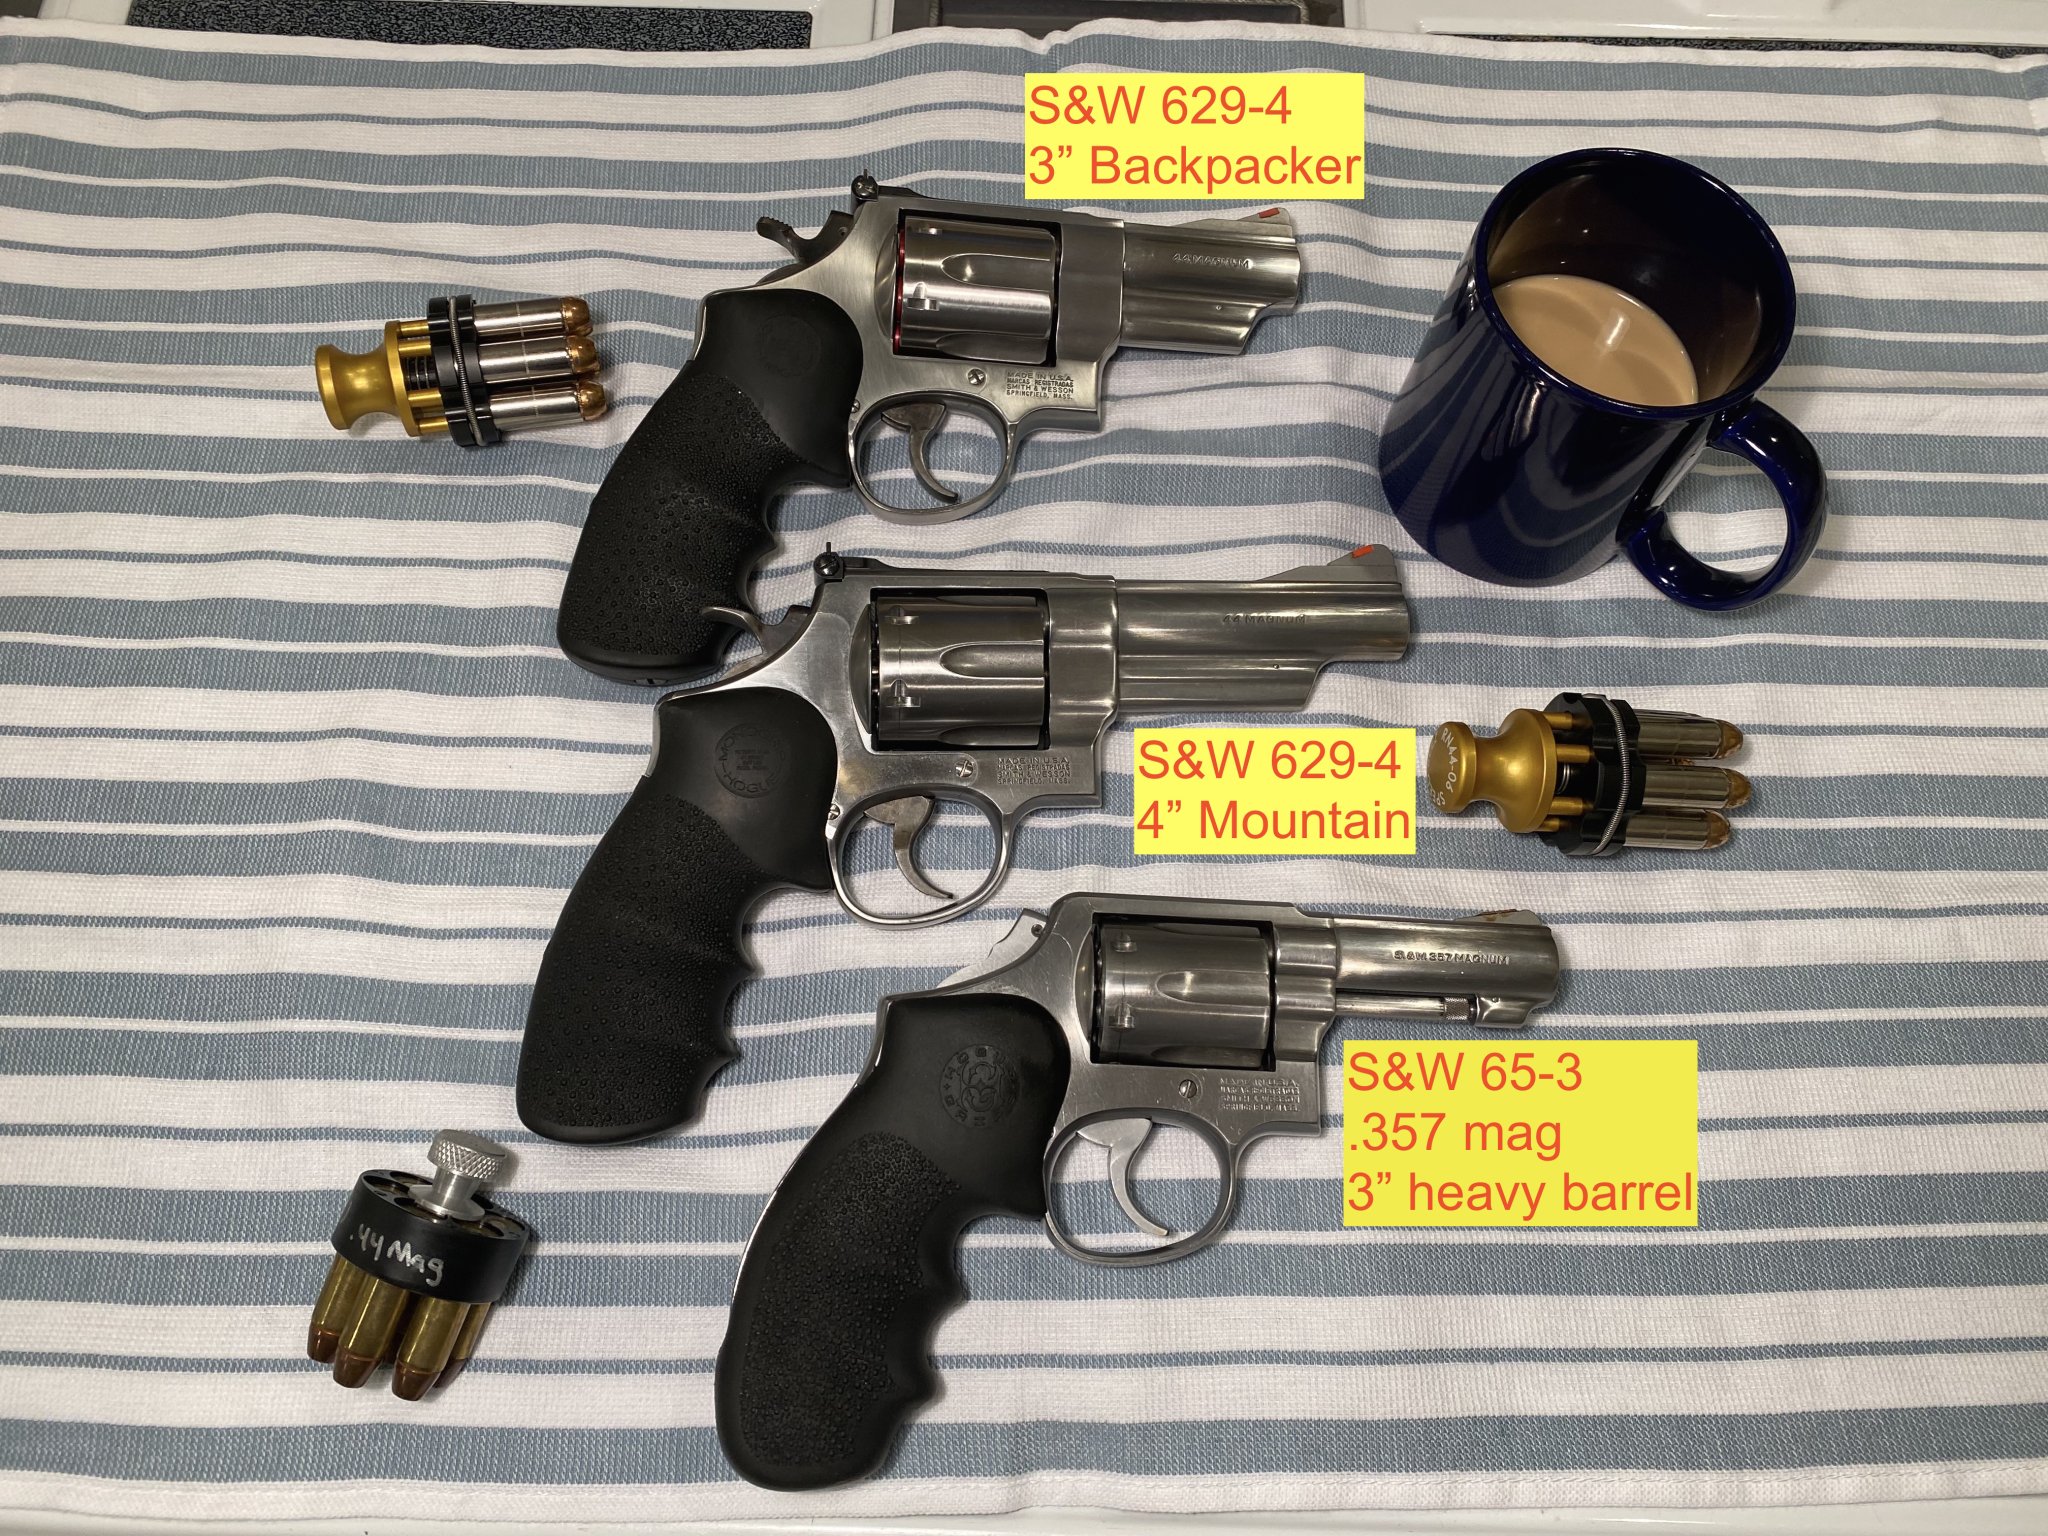 IMG_1793Smith & Wesson Models BackPacker Mountain 65-3 with Coffee Photos 2022.jpg